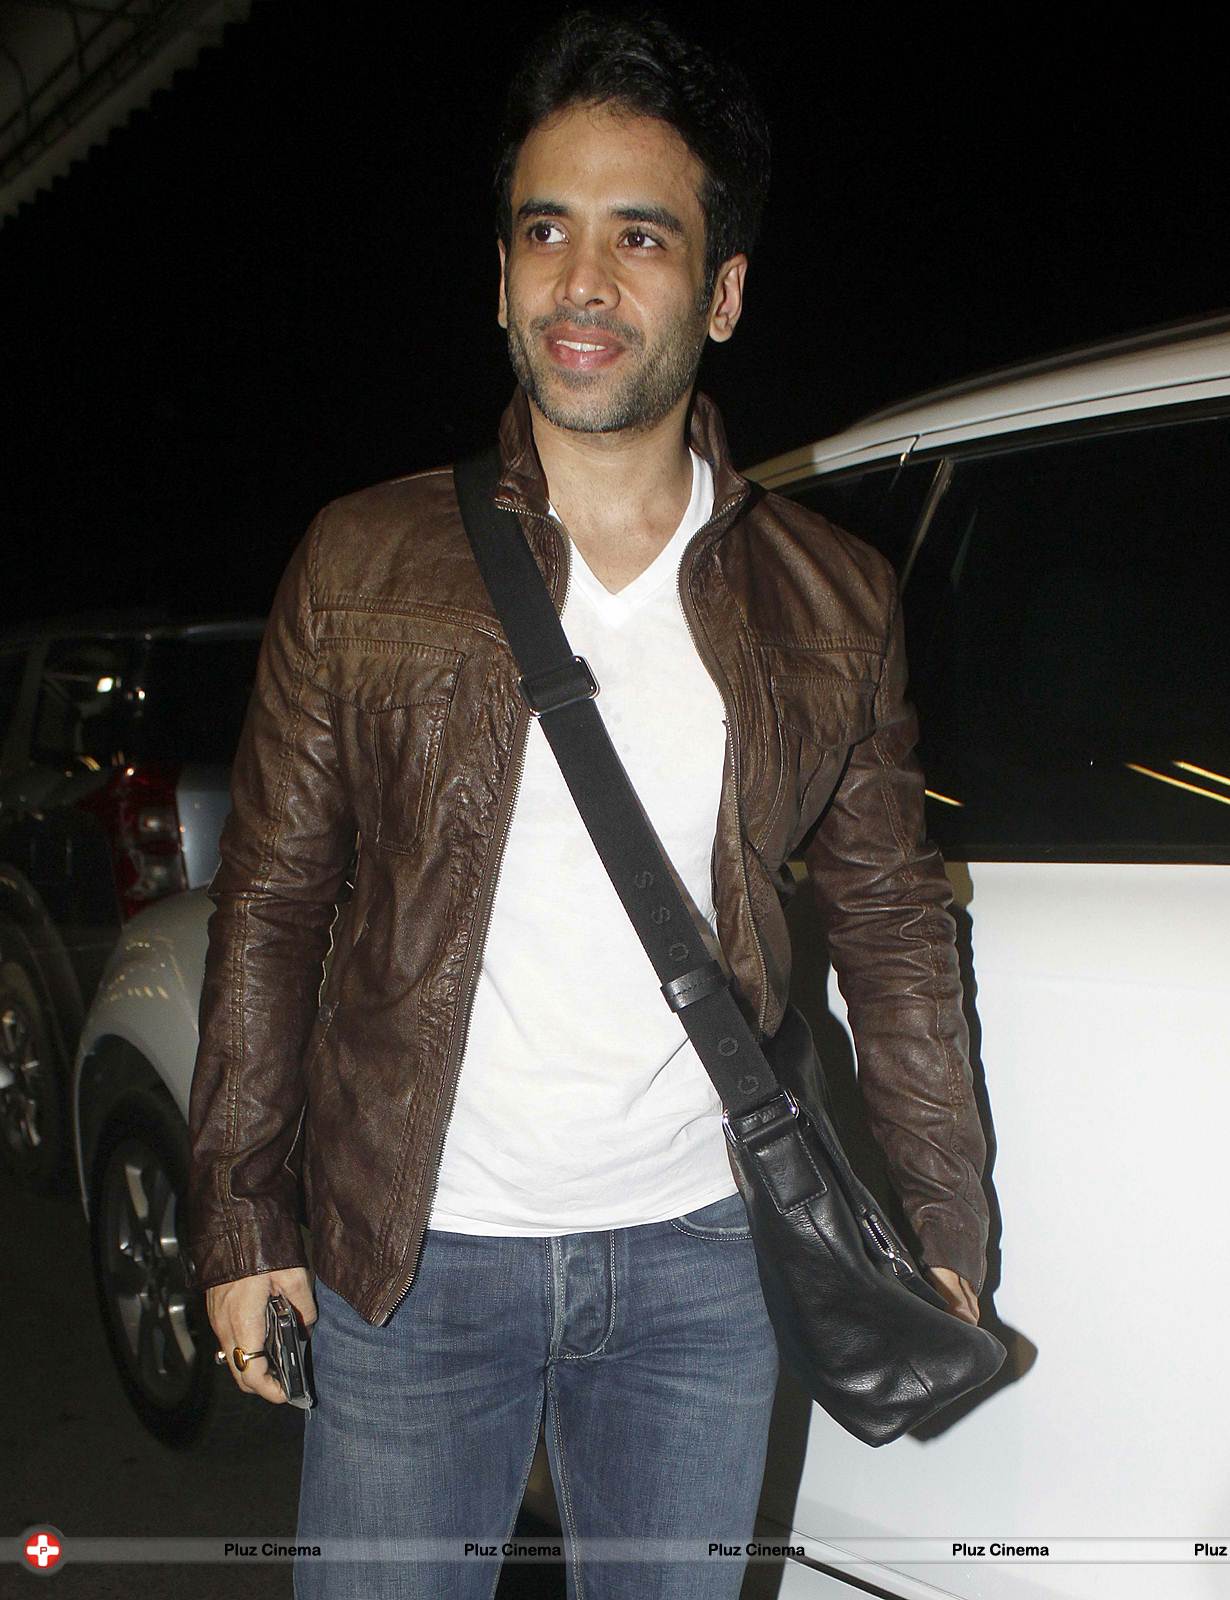 Tusshar Kapoor - Bollywood celebs to attend India Film and Television Awards Photos | Picture 561941